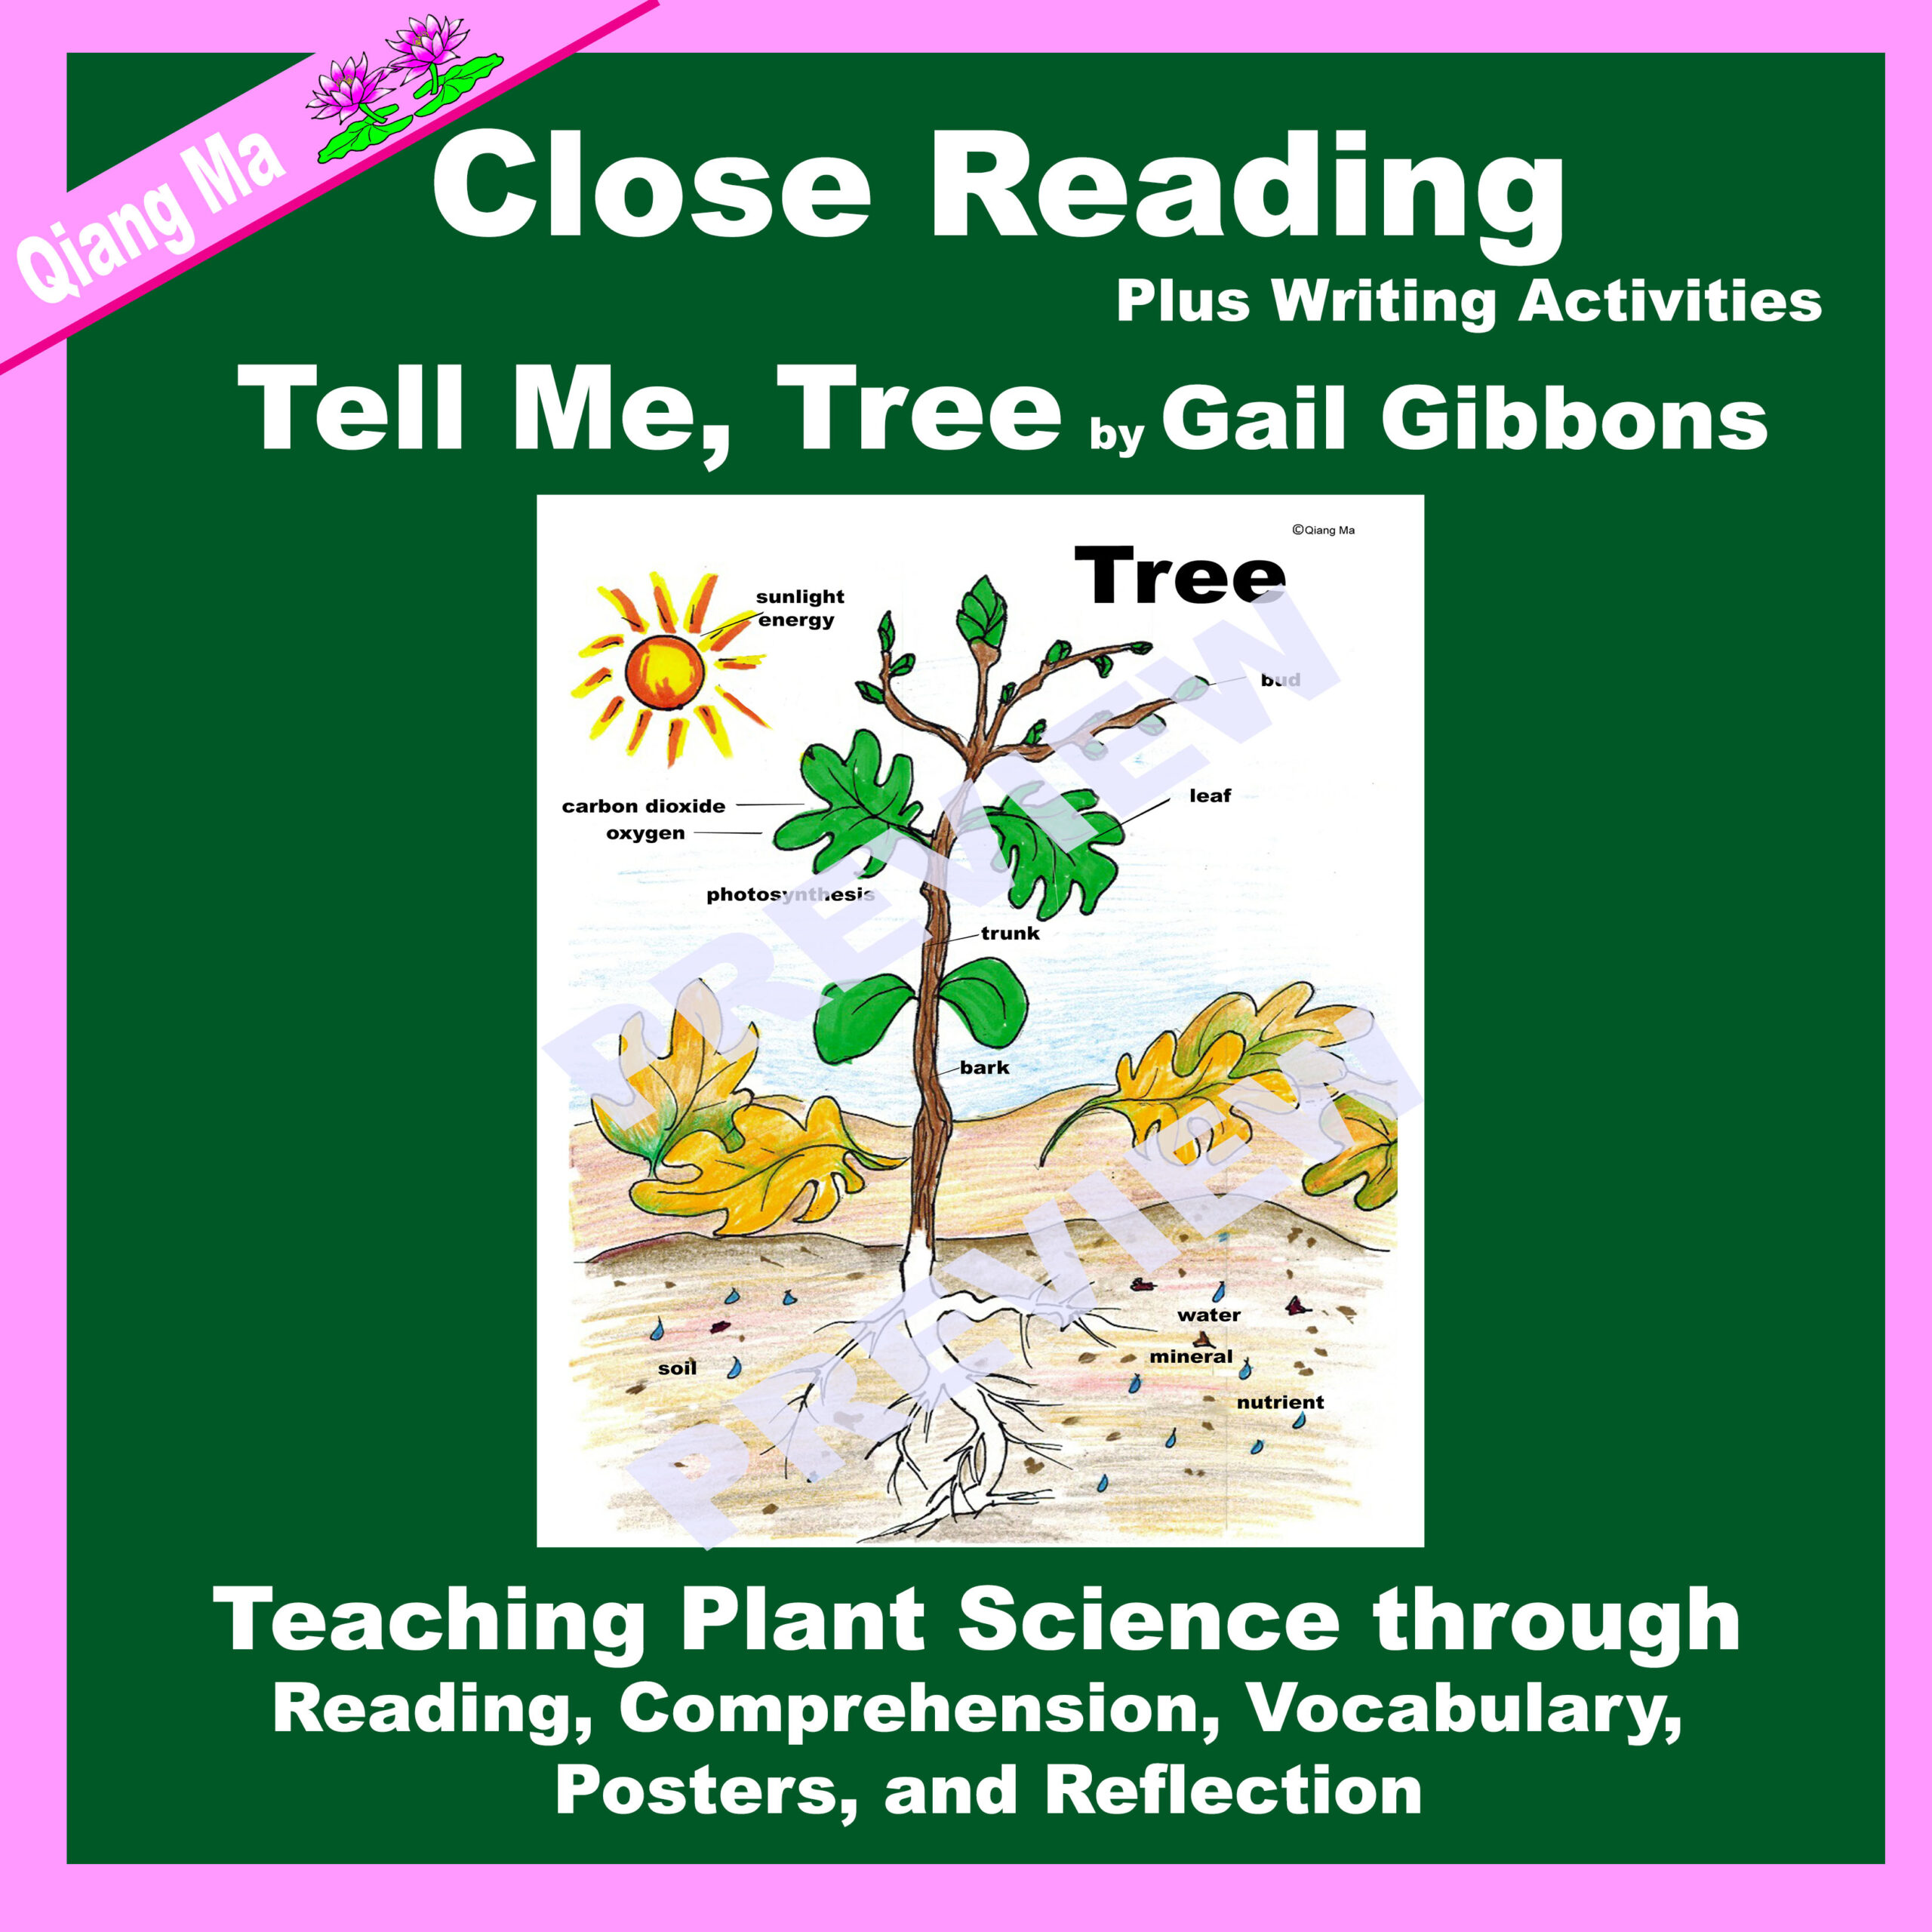 Close Reading: Tell Me, Tree by Gail Gibbons